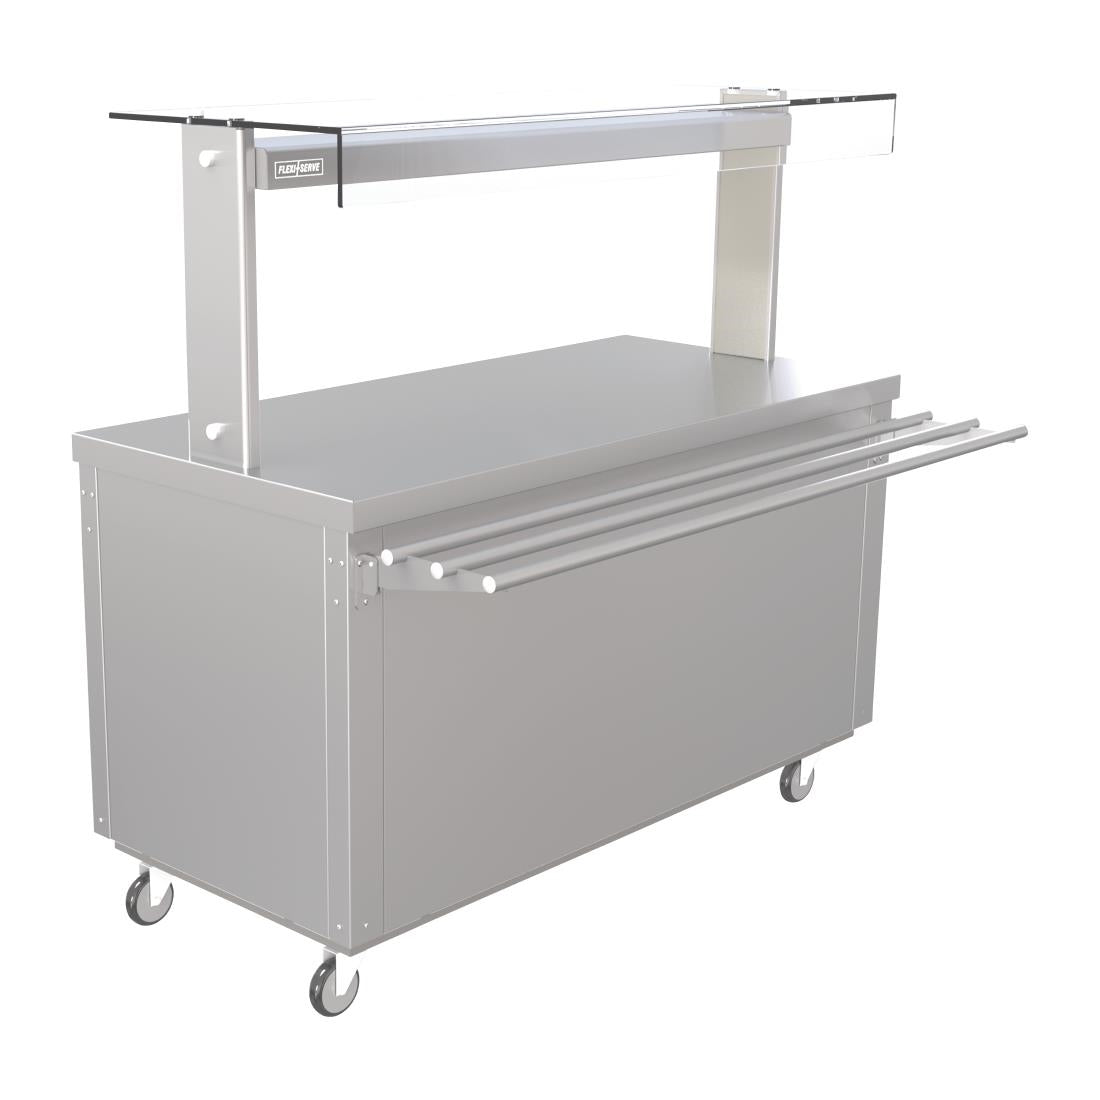 Parry Ambient Buffet Bar with Chilled Cupboard 1495mm FS-A4PACK - FD232 Hot Cupboards Parry   